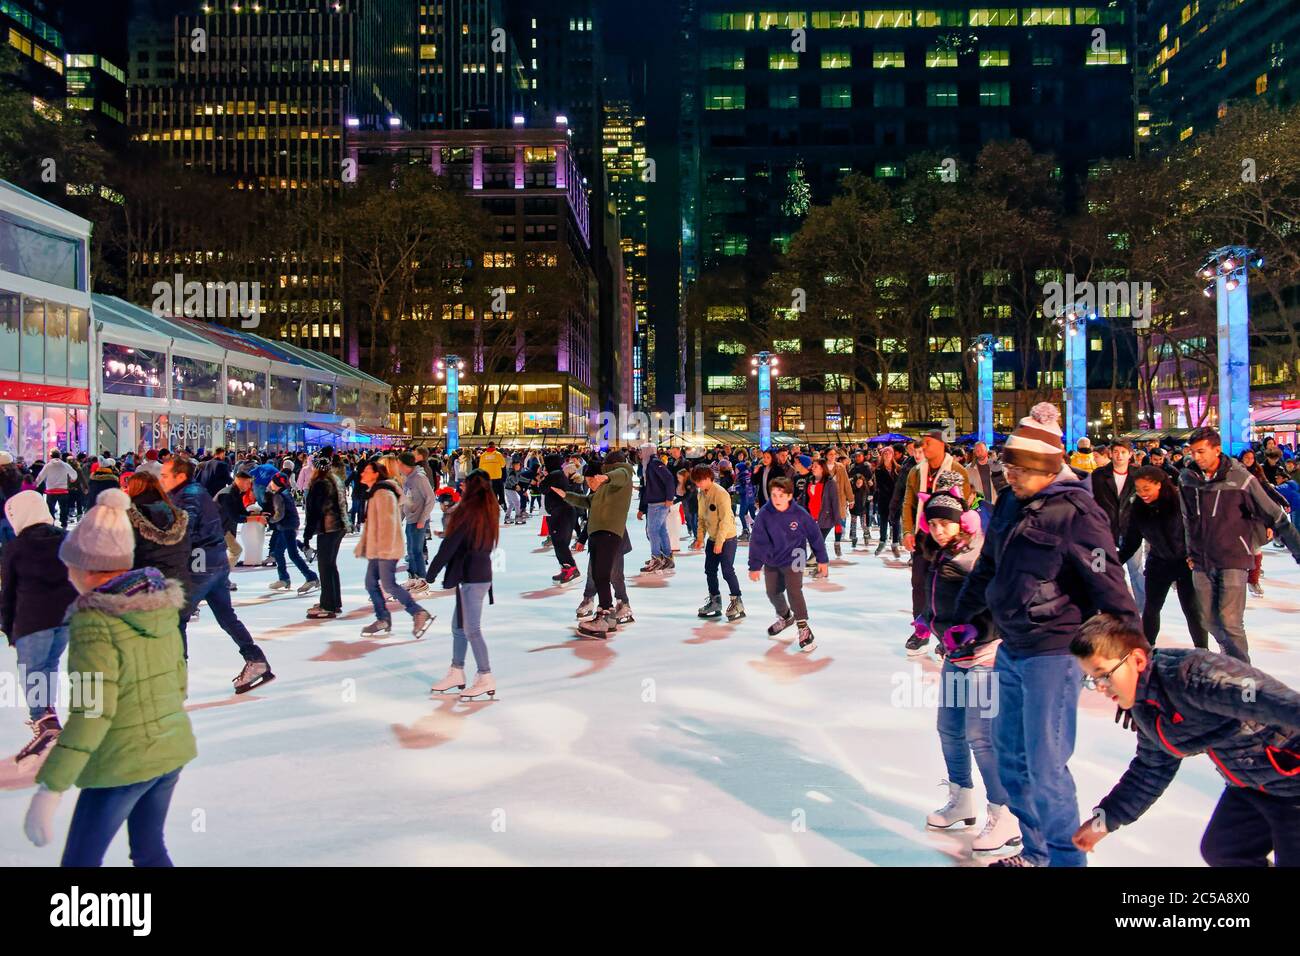 Large number of people skating on the Winter Village ice rink at Bryant Park, Manhattan, New York City, USA Stock Photo